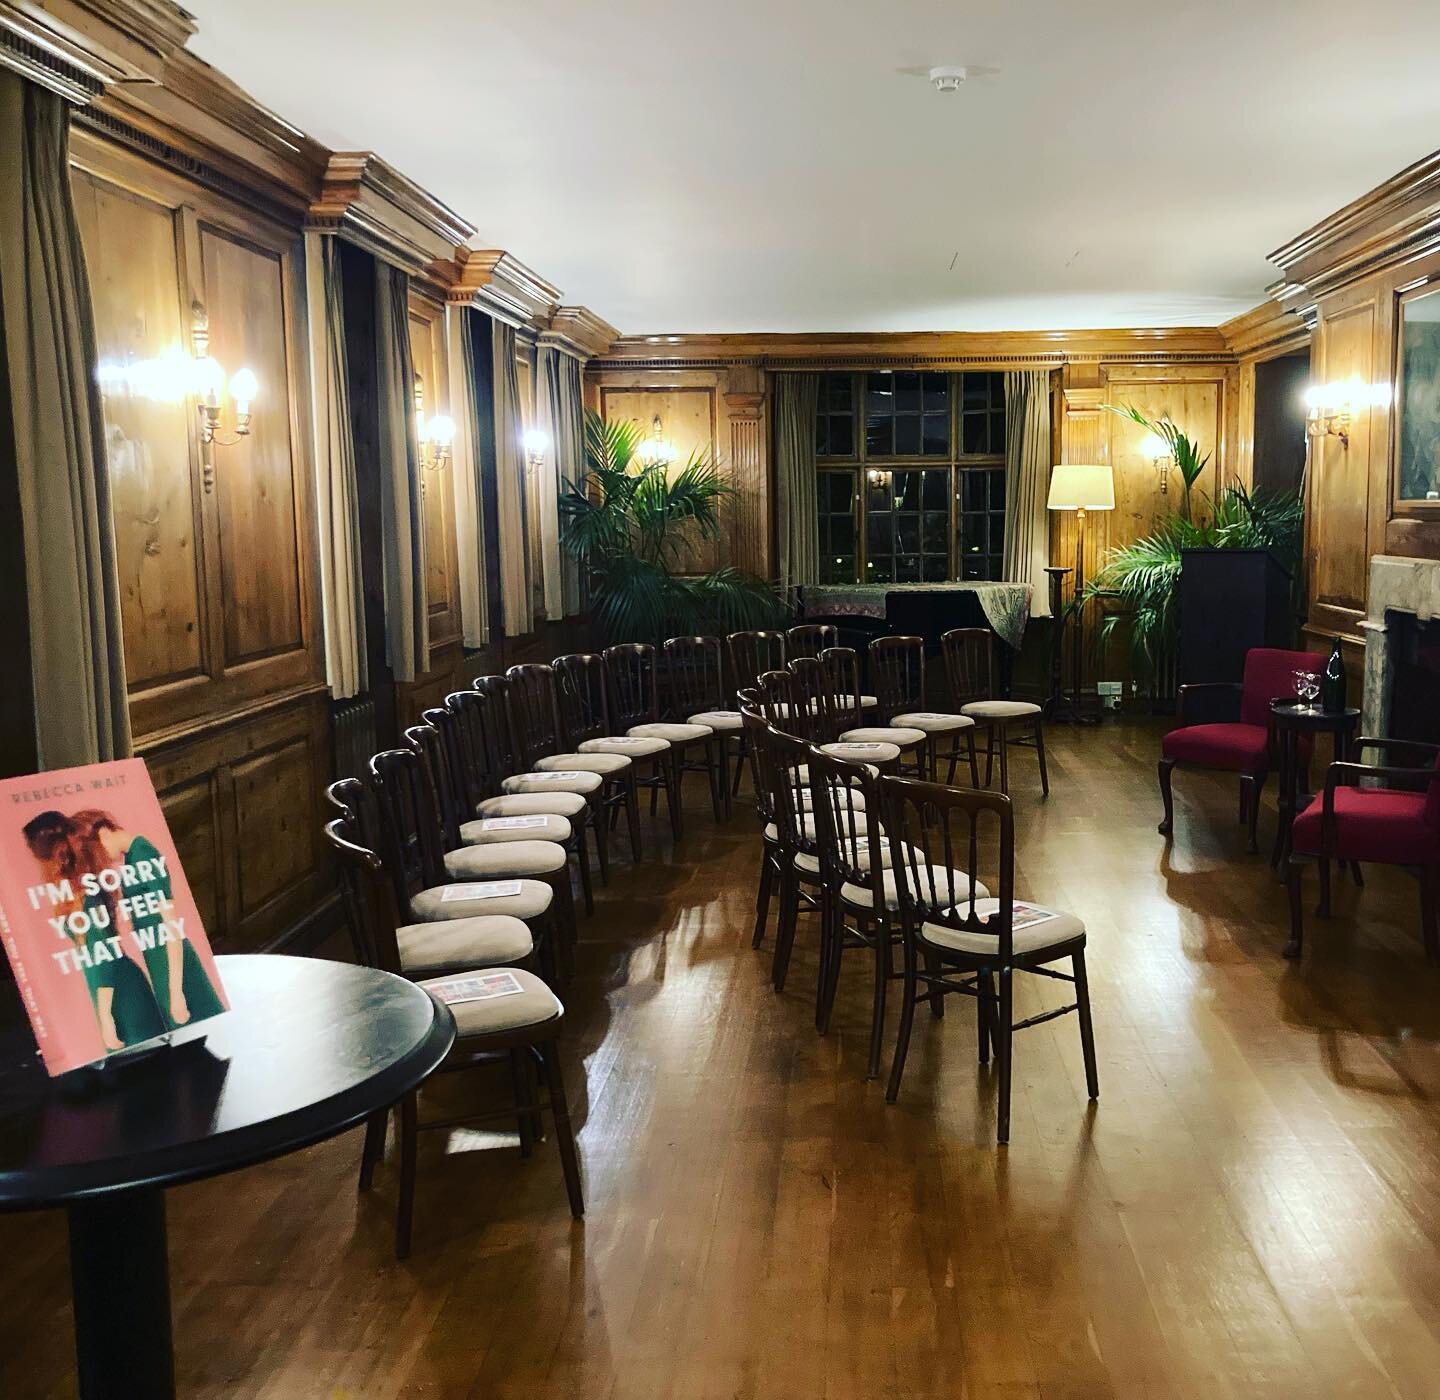 Thank you @burghhouse1704 for a wonderful evening last night with Rebecca Wait discussing I&rsquo;m Sorry You Feel That Way in your beautiful venue! Fascinating to hear how these characters I grew so close to came to life, and about Rebecca&rsquo;s w